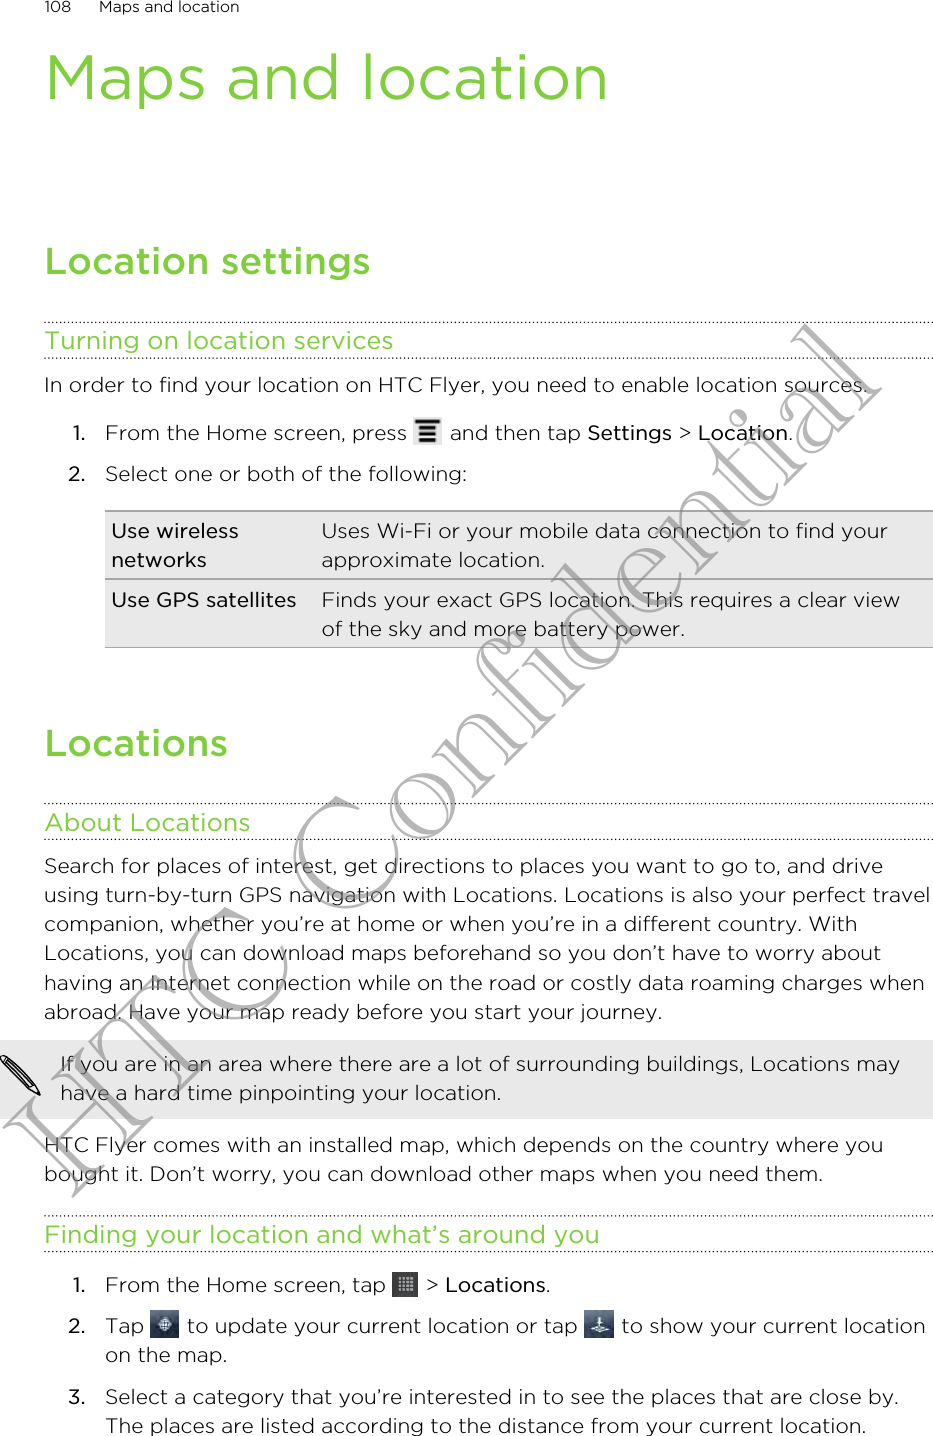 Maps and locationLocation settingsTurning on location servicesIn order to find your location on HTC Flyer, you need to enable location sources.1. From the Home screen, press   and then tap Settings &gt; Location.2. Select one or both of the following:Use wirelessnetworksUses Wi-Fi or your mobile data connection to find yourapproximate location.Use GPS satellites Finds your exact GPS location. This requires a clear viewof the sky and more battery power.LocationsAbout LocationsSearch for places of interest, get directions to places you want to go to, and driveusing turn-by-turn GPS navigation with Locations. Locations is also your perfect travelcompanion, whether you’re at home or when you’re in a different country. WithLocations, you can download maps beforehand so you don’t have to worry abouthaving an Internet connection while on the road or costly data roaming charges whenabroad. Have your map ready before you start your journey.If you are in an area where there are a lot of surrounding buildings, Locations mayhave a hard time pinpointing your location.HTC Flyer comes with an installed map, which depends on the country where youbought it. Don’t worry, you can download other maps when you need them.Finding your location and what’s around you1. From the Home screen, tap   &gt; Locations.2. Tap   to update your current location or tap   to show your current locationon the map.3. Select a category that you’re interested in to see the places that are close by.The places are listed according to the distance from your current location.108 Maps and locationHTC Confidential